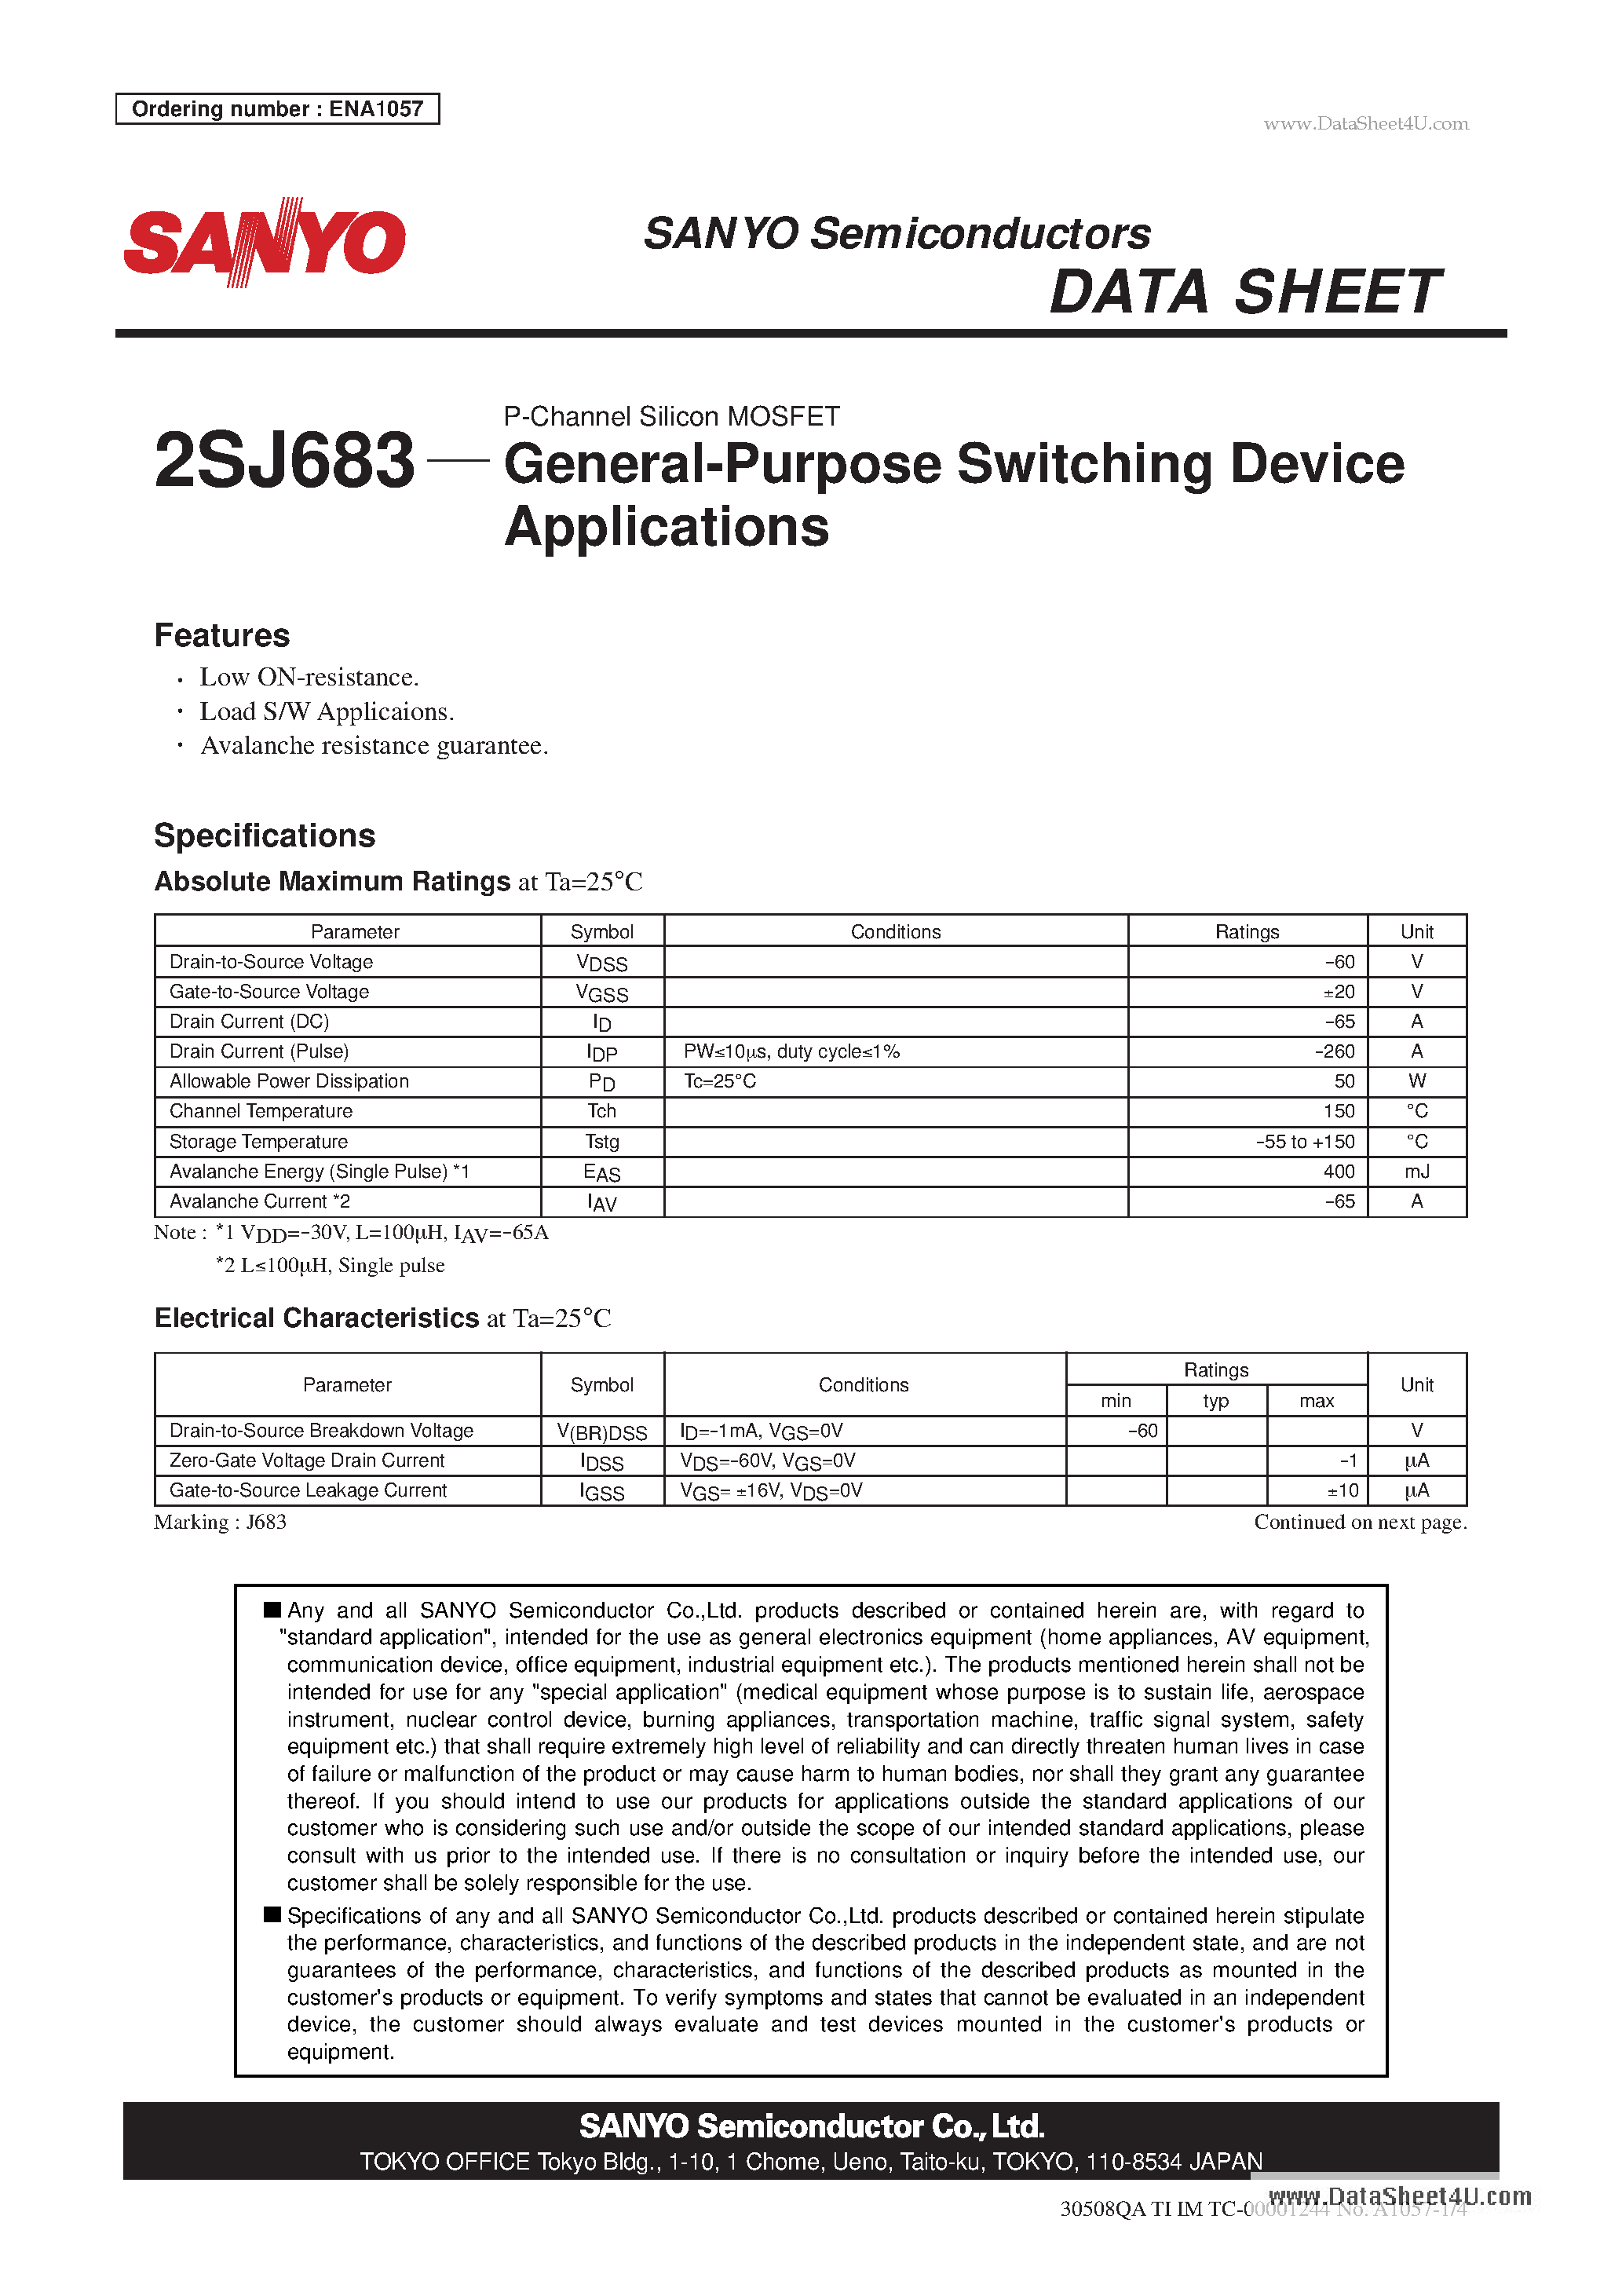 Даташит 2SJ683 - P-Channel Silicon MOSFET General-Purpose Switching Device Applications страница 1